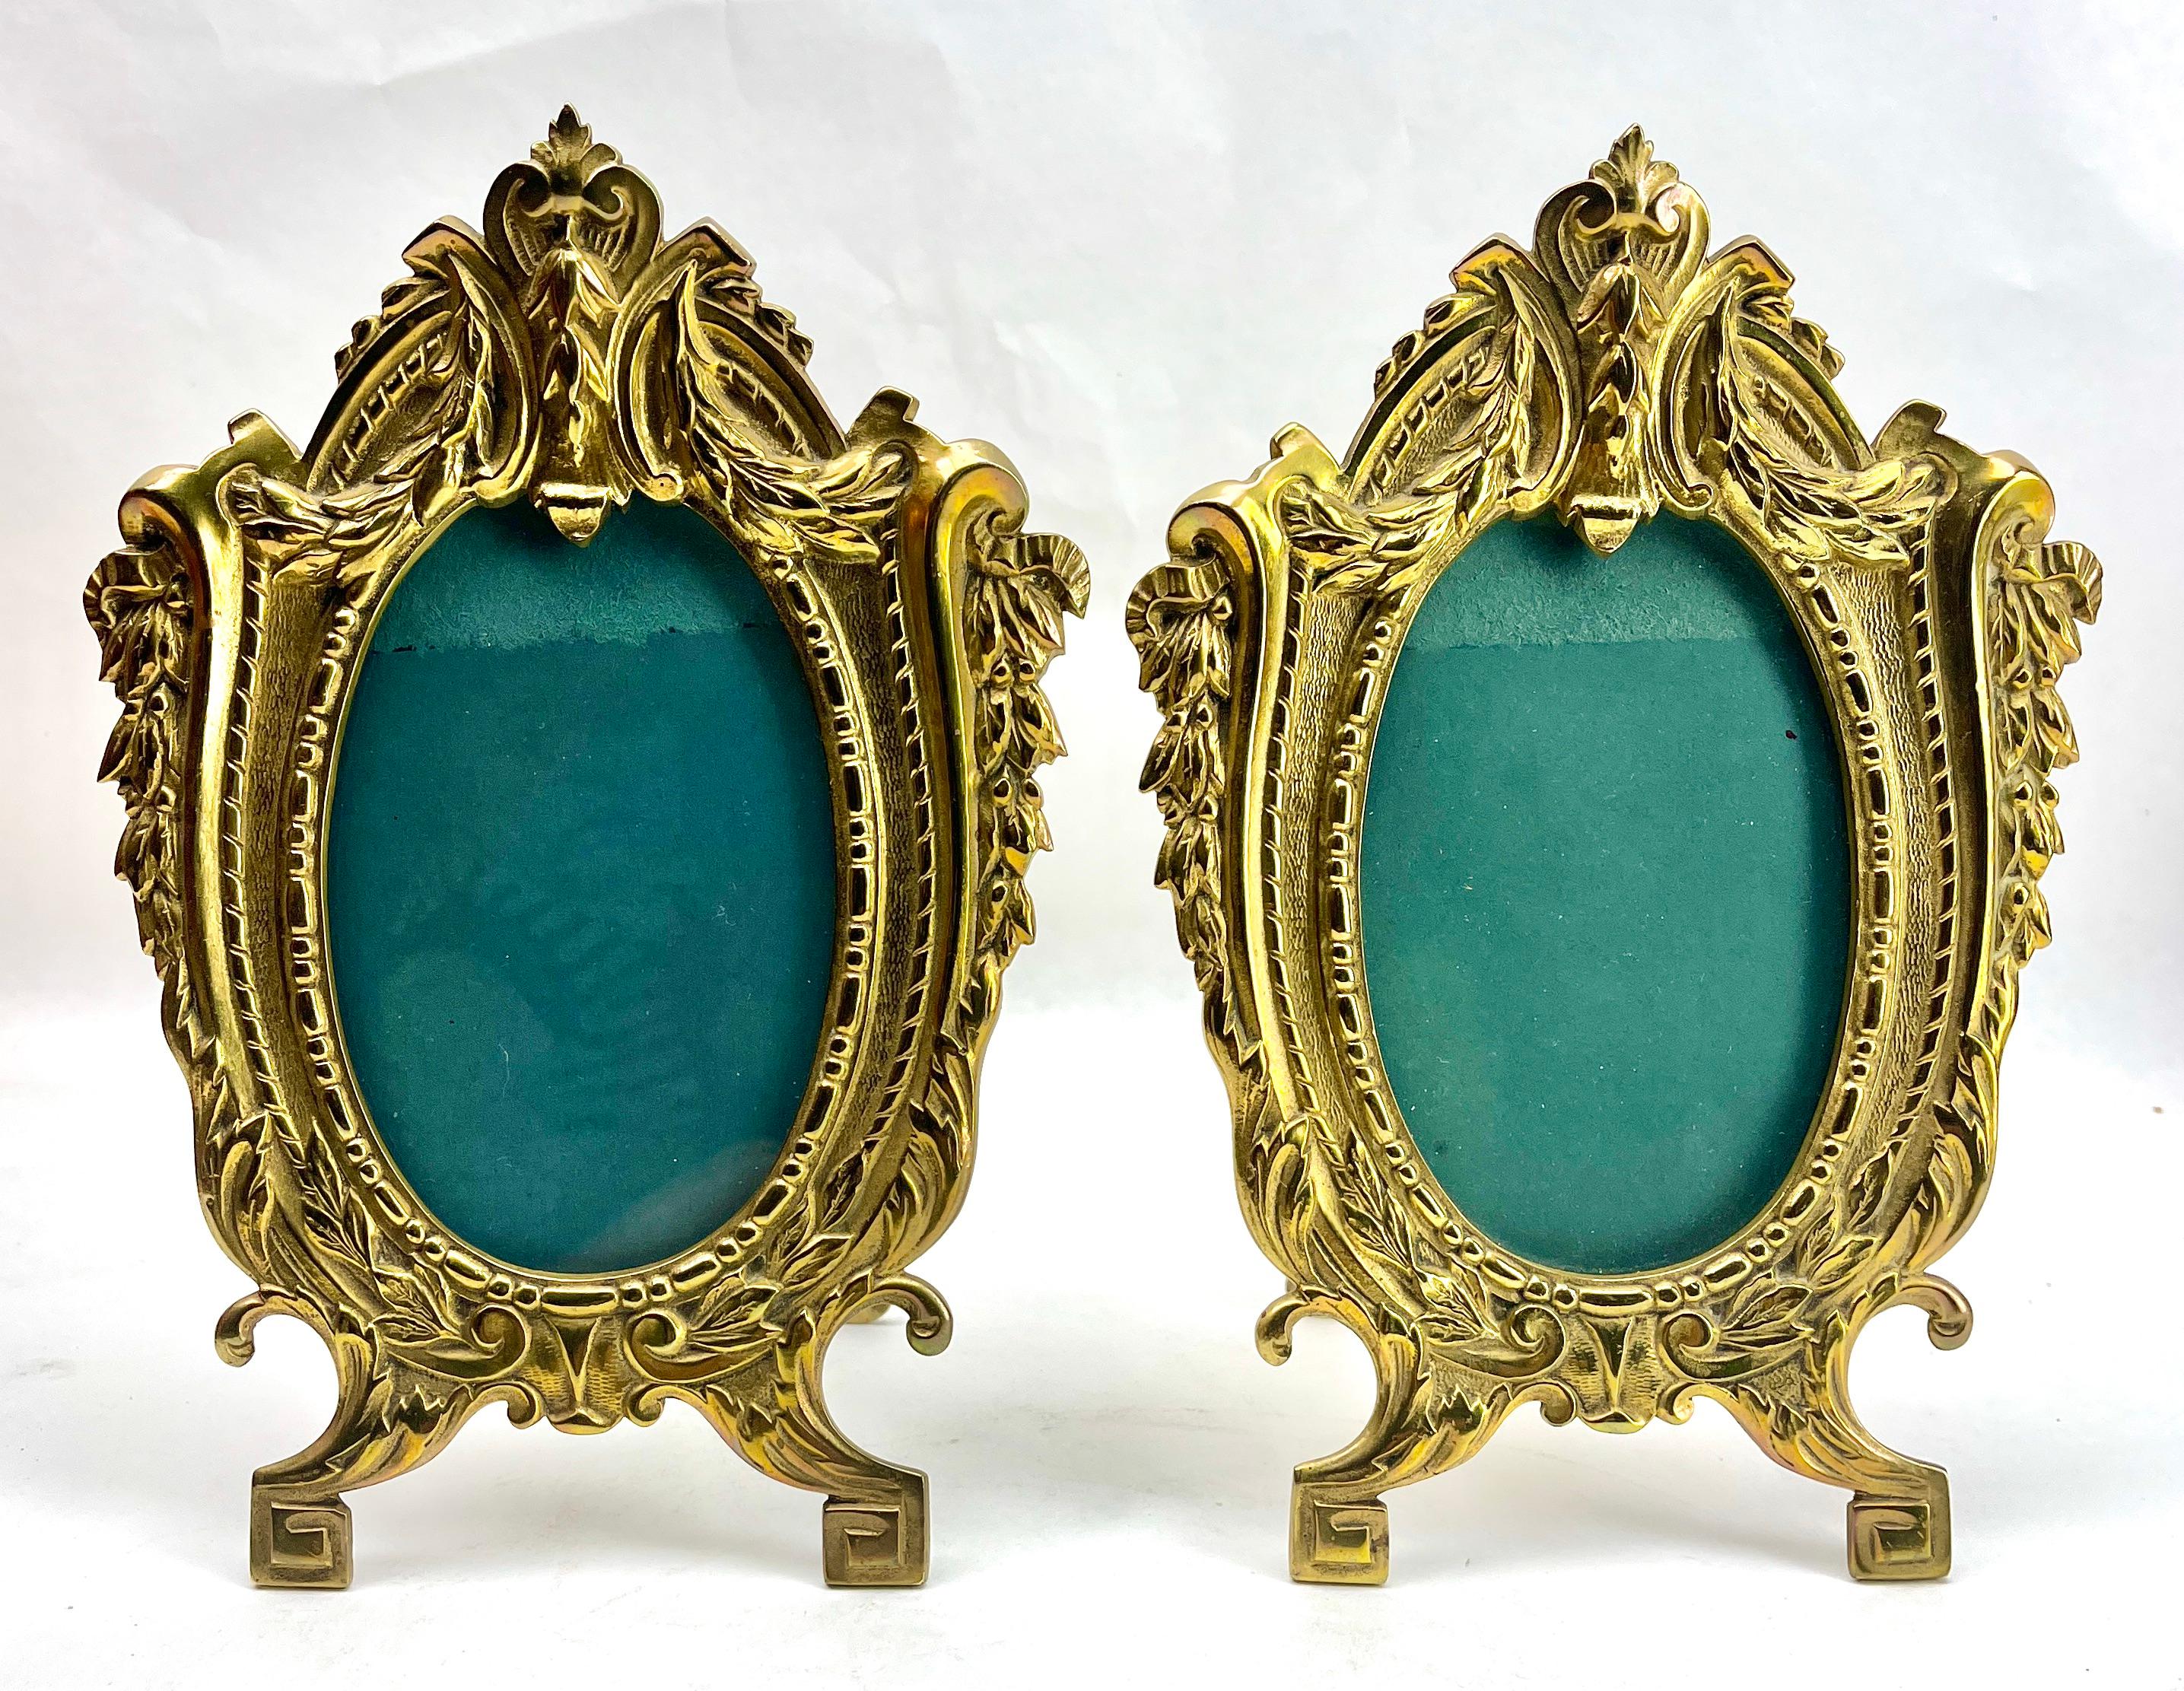 Pair of Picture Frame, Polished Brass, Made by J.H. France, 1900s

Pair photograph frame (or miniature frame) with classical Victorian design. 
Typical frame for wedding photographs. 
Made of solid cast brass with a highly polished front surface and